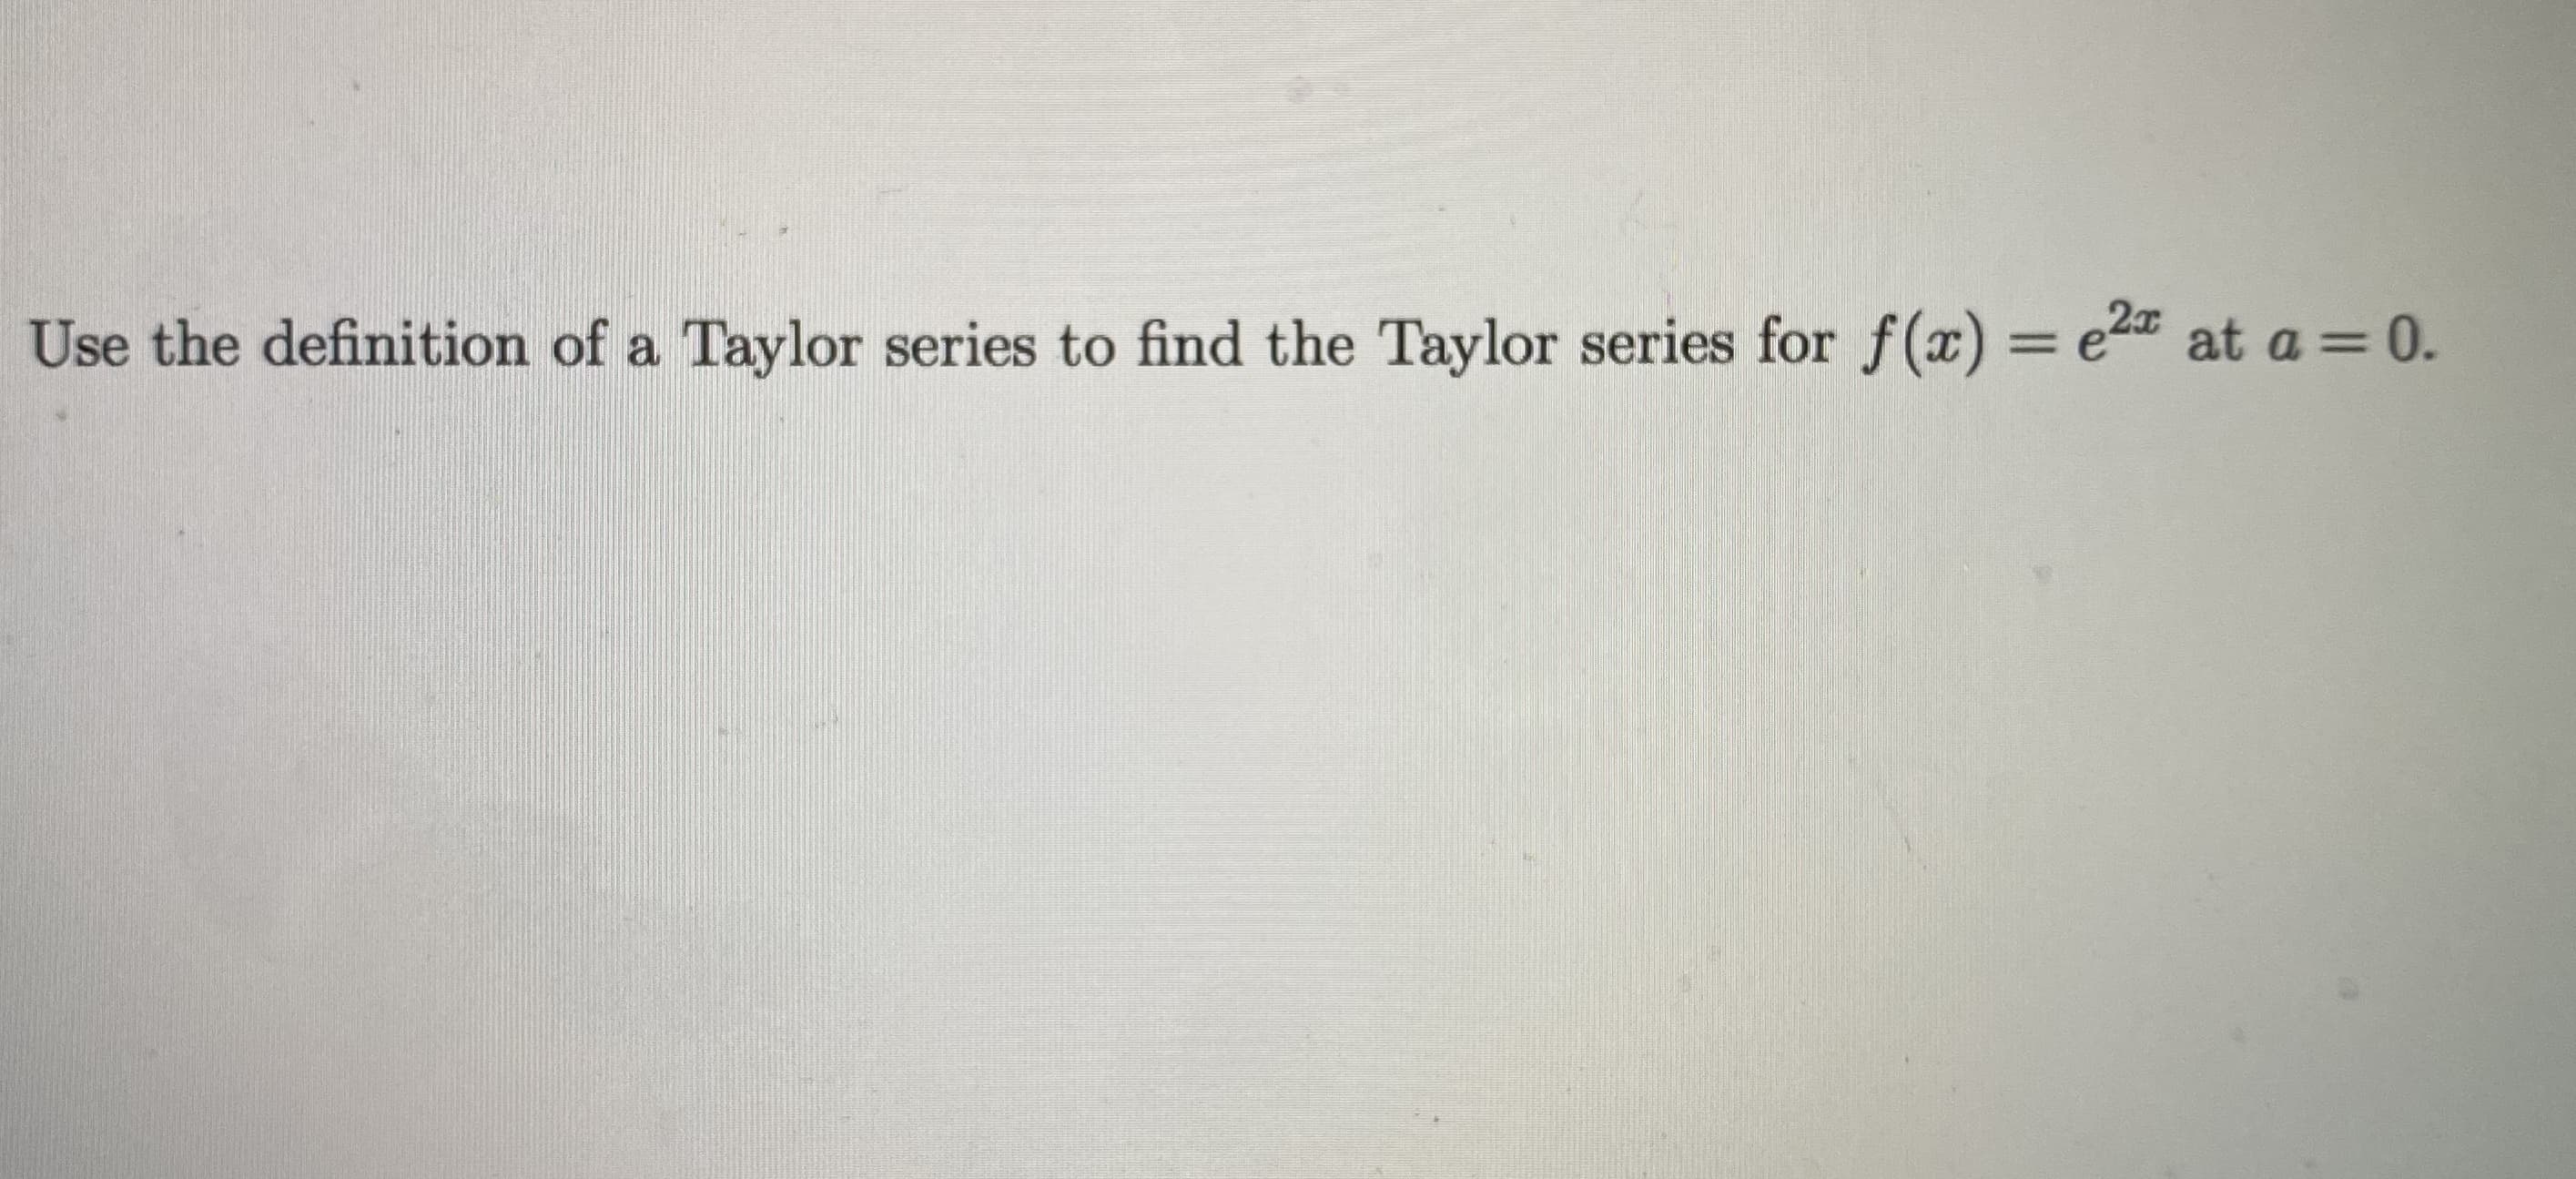 Use the definition of a Taylor series to find the Taylor series for f(x) = e2 at a= 0.
%3D
%3D
